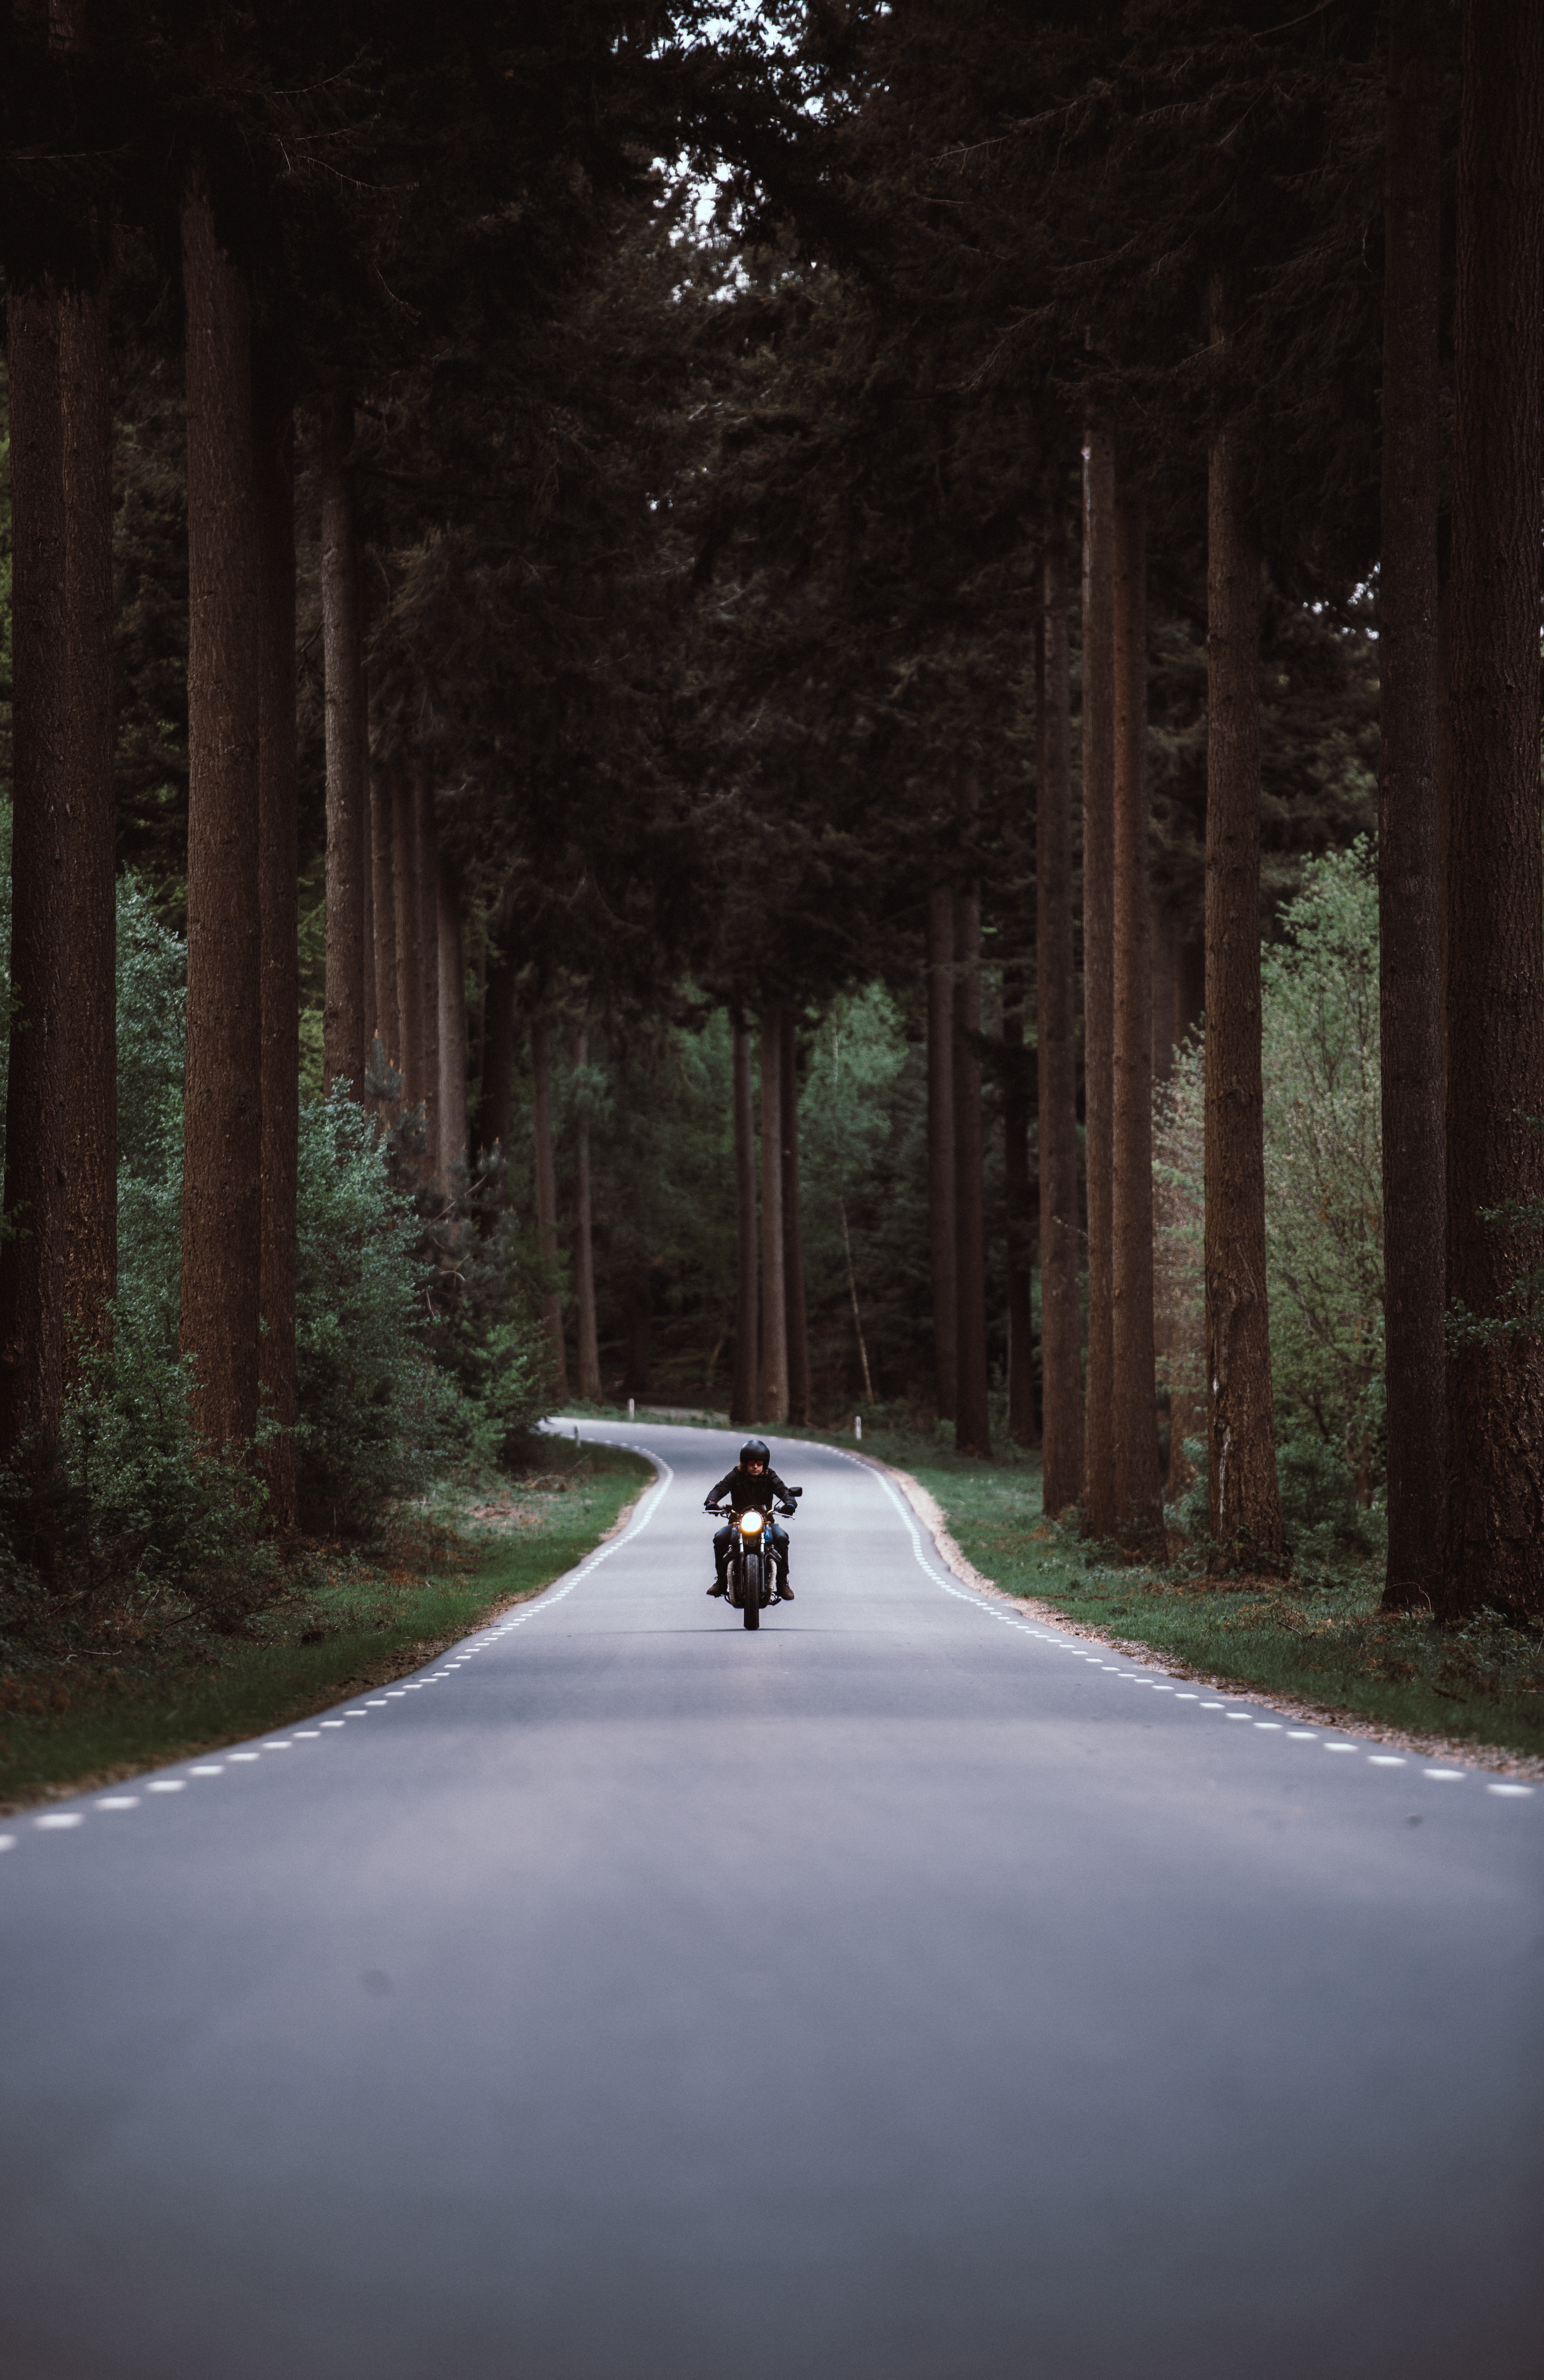 motorcycle, motorcycles, road, turn, forest, traffic, movement, motorcyclist